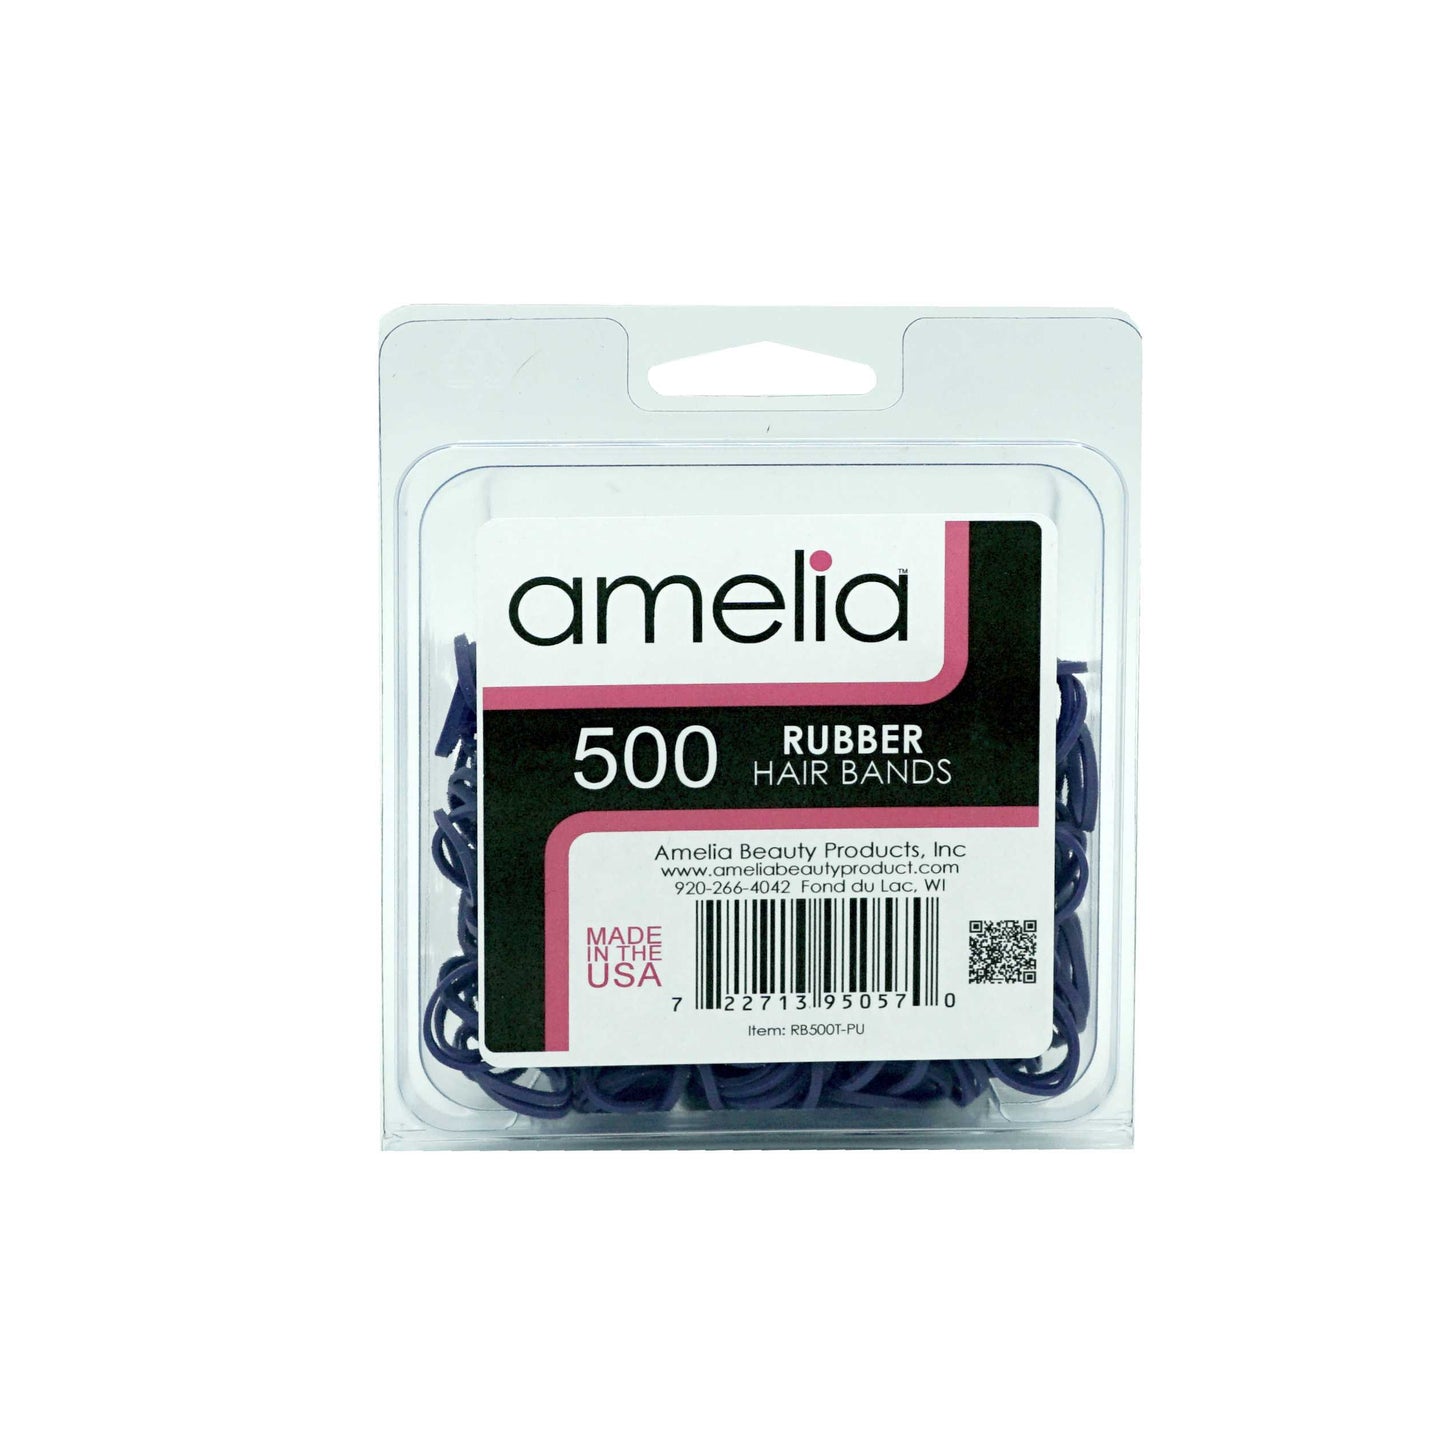 Amelia Beauty | 1/2in, Purple, Elastic Rubber Band Pony Tail Holders | Made in USA, Ideal for Ponytails, Braids, Twists, Dreadlocks, Styling Accessories for Women, Men and Girls | 500 Pack